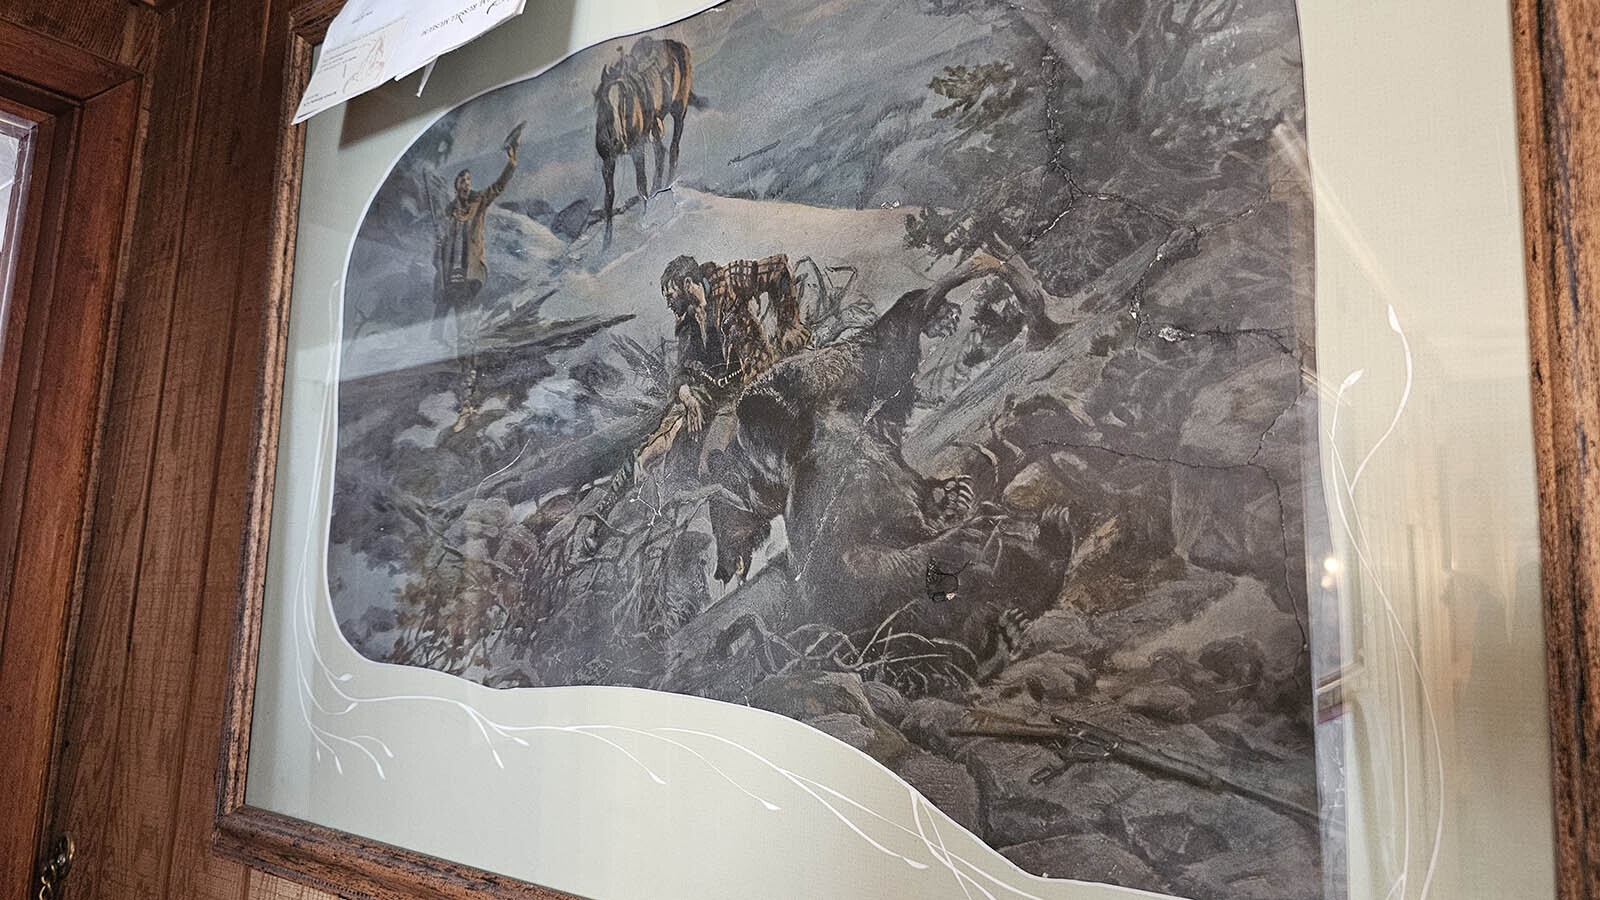 This Charles Russell print was discovered behind sheetrock and layers of wallpaper and newspaper. Dave Stephens believes it could be an original.